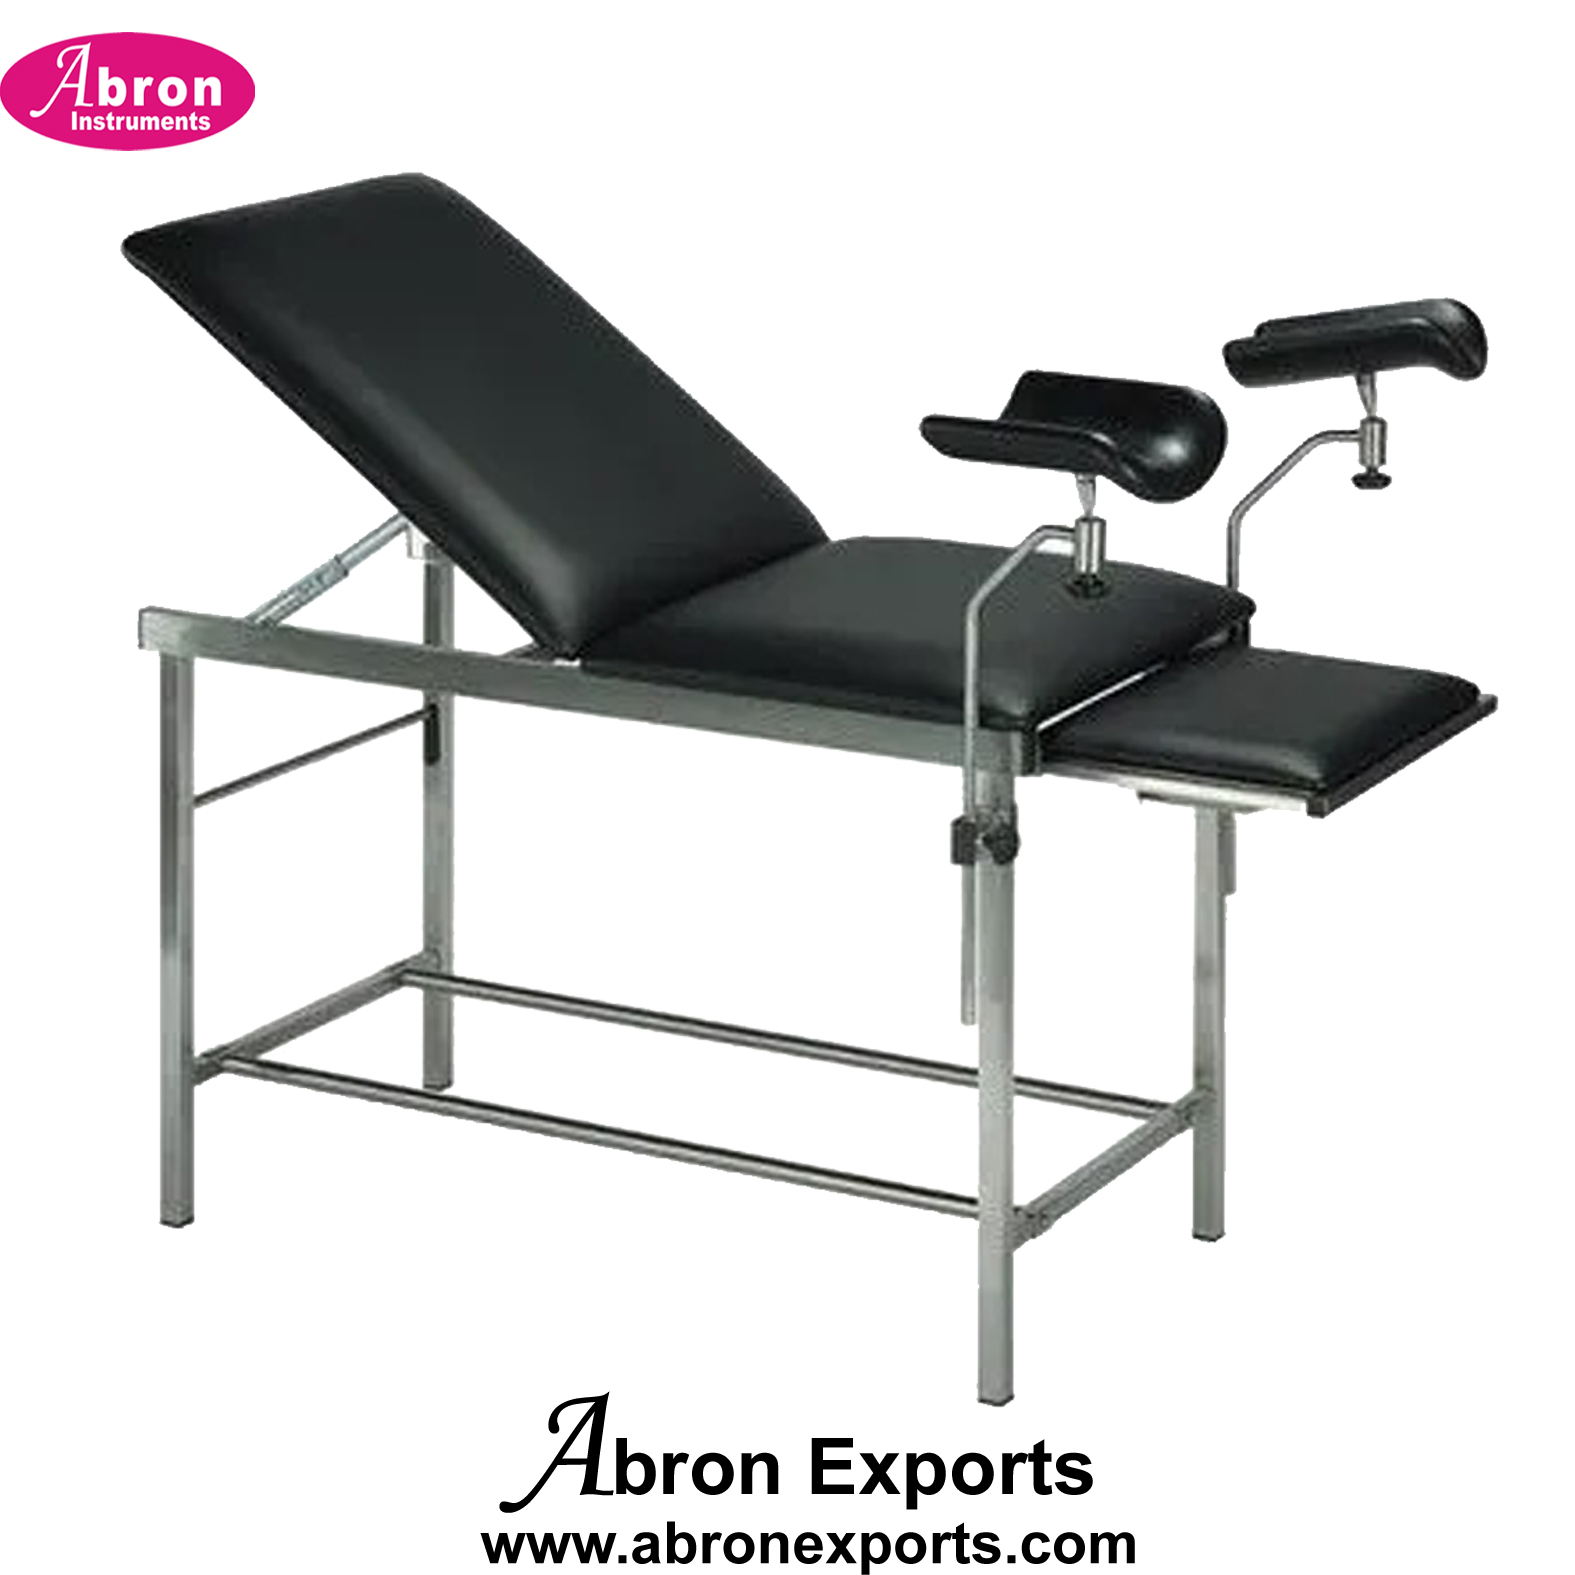 Obstetric tables delivery beds examination tables Abron ABM-2714GYD